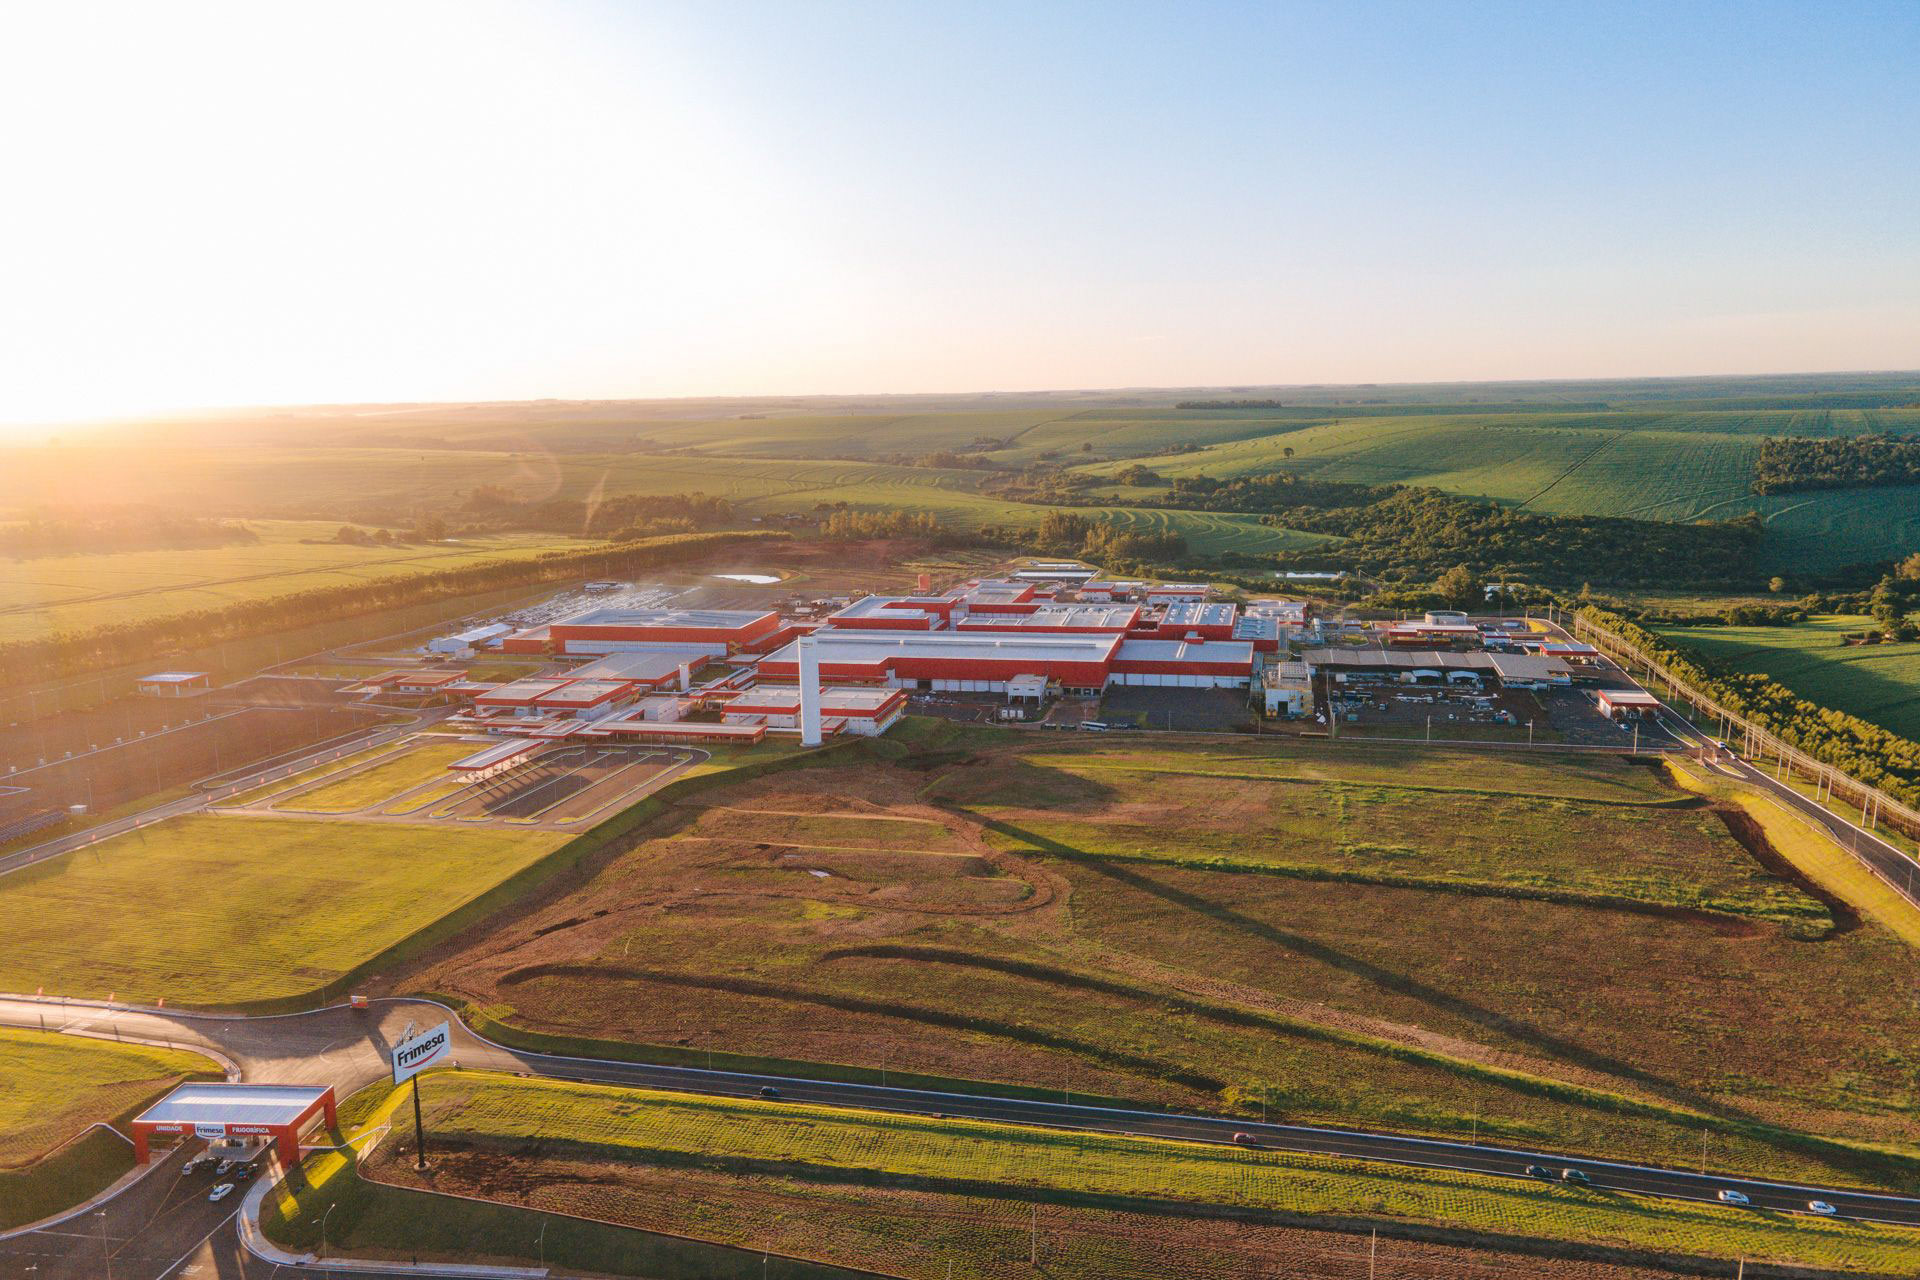 Marel provides technology to the largest pork processing plant in Latin America